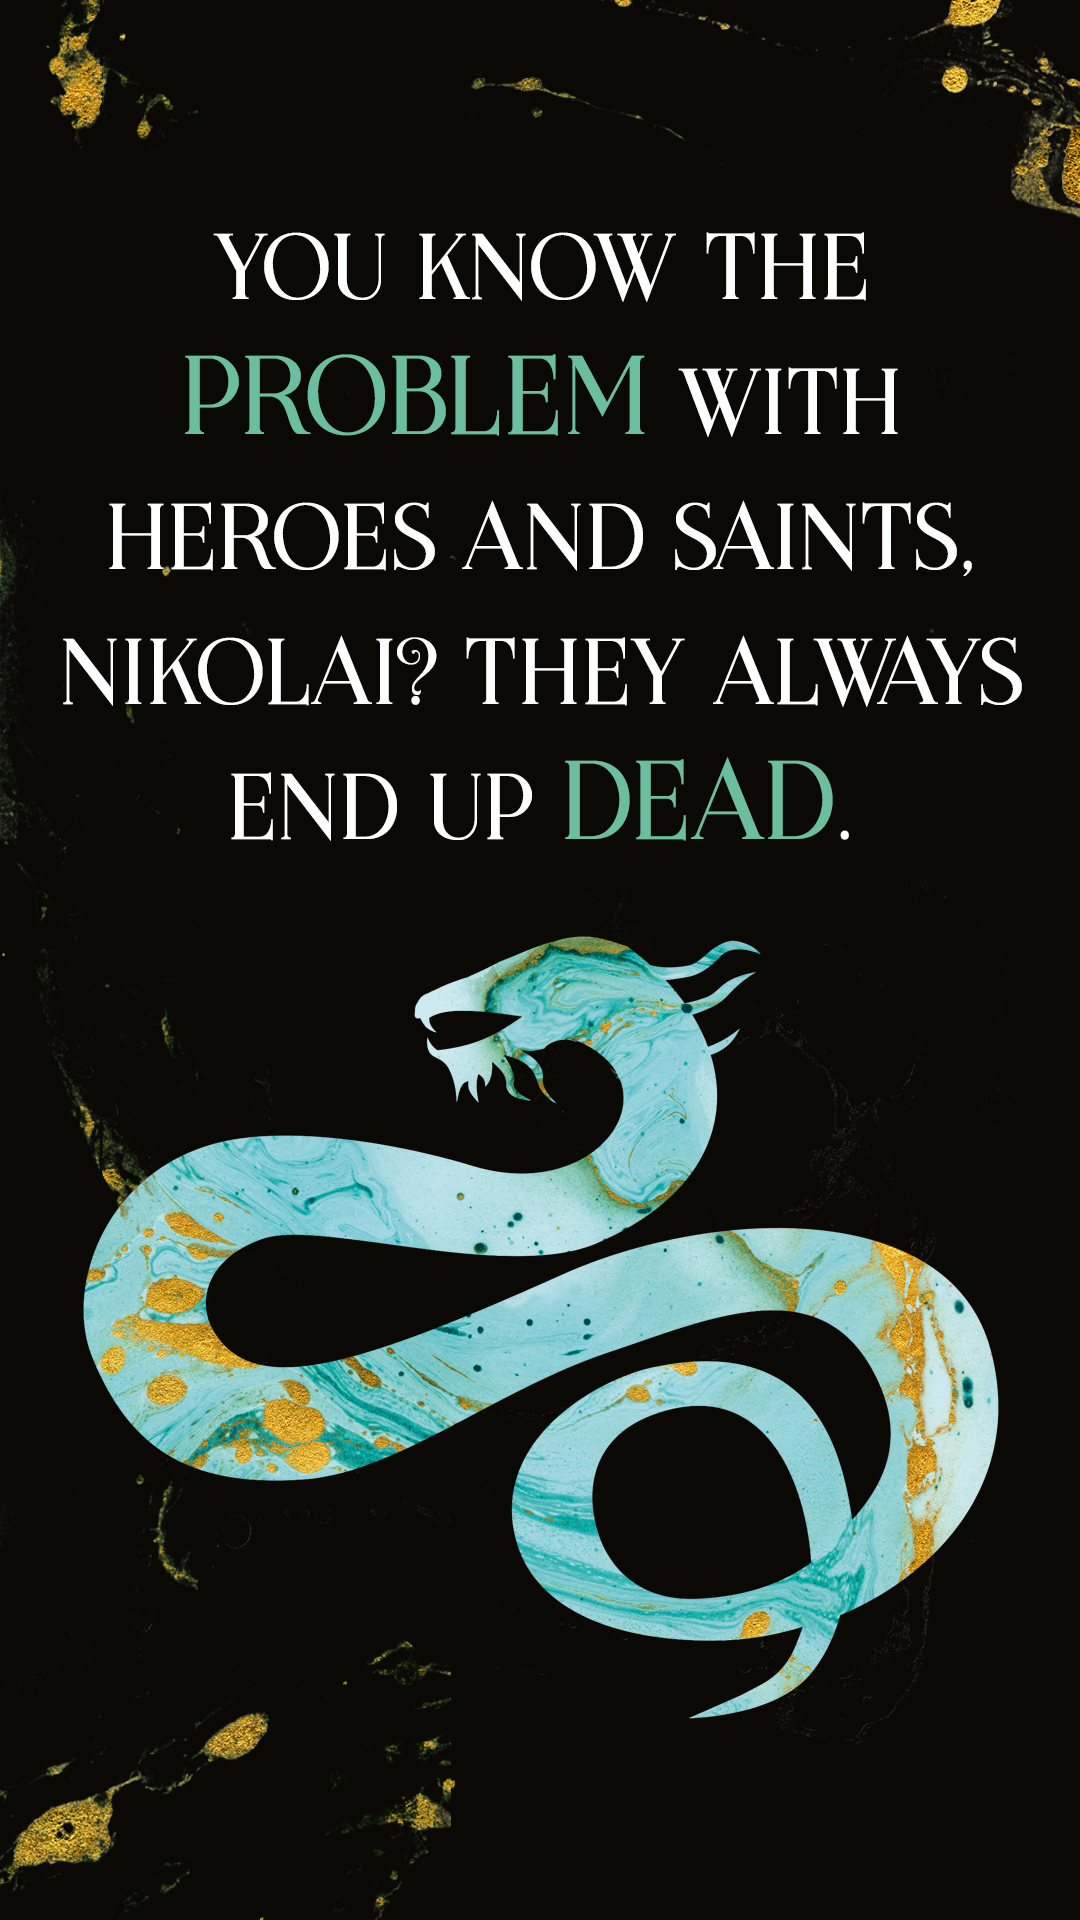 Book cover featuring a quote "you know the problem with heroes and saints, nikolai? they always end up dead," over an artistic depiction of a turquoise and black snake on a dark, speckled background.